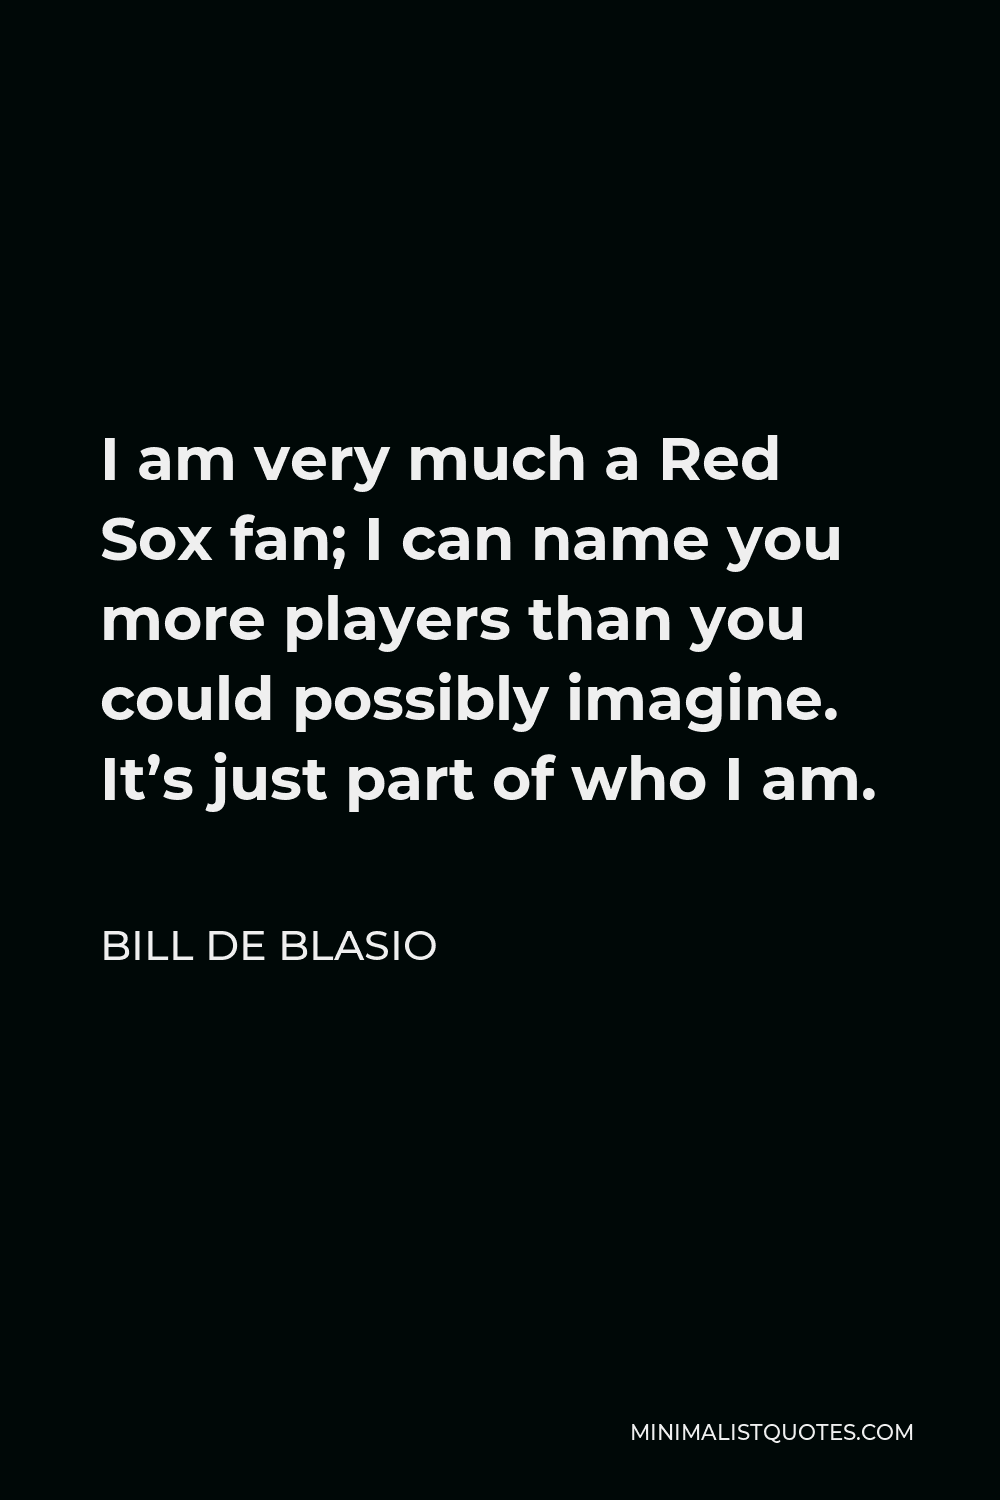 Bill de Blasio Quote - I am very much a Red Sox fan; I can name you more players than you could possibly imagine. It’s just part of who I am.